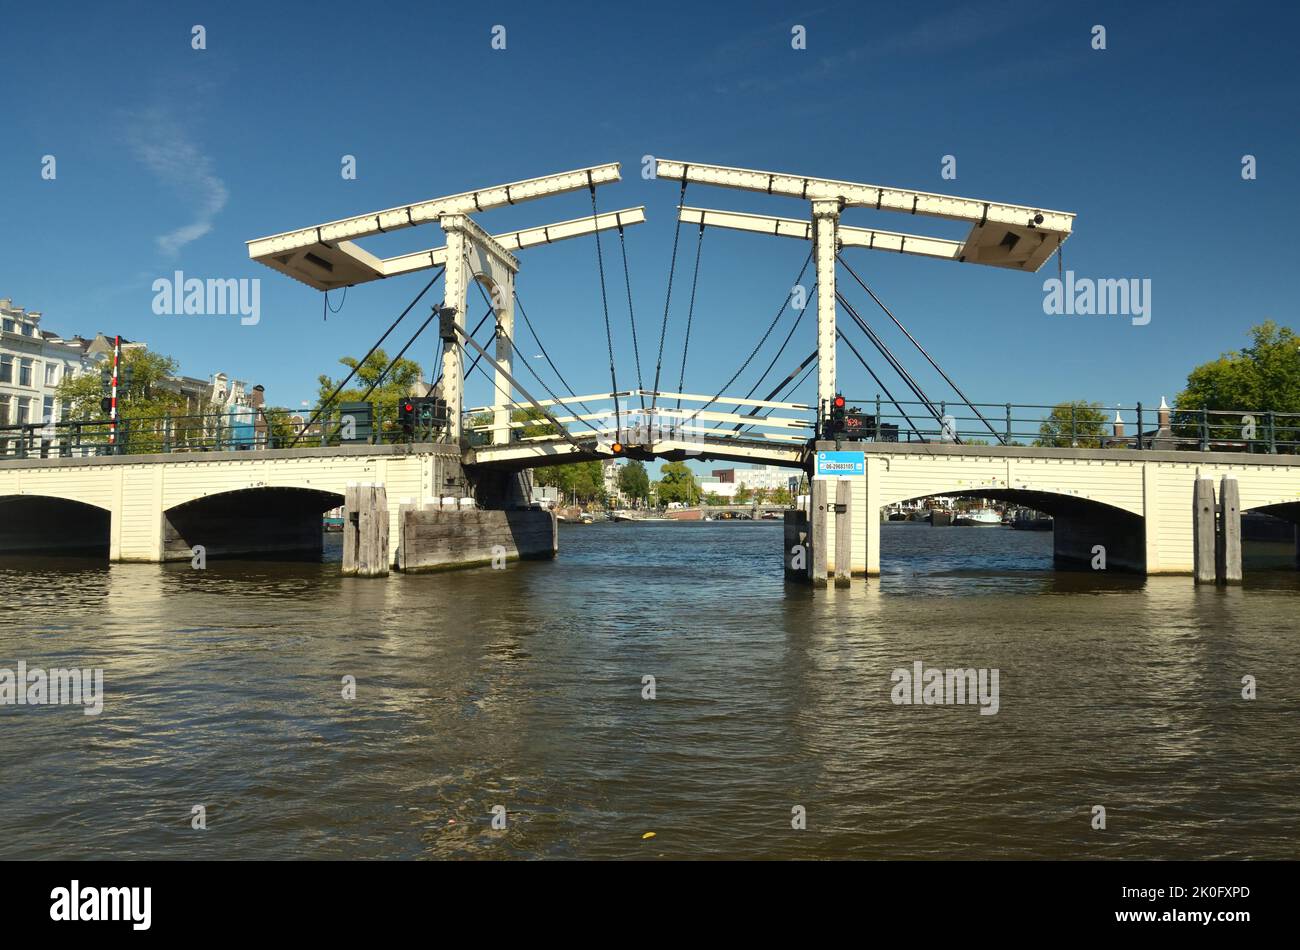 The famous Amstel lifting bridge in Amsterdam, Netherlands Stock Photo